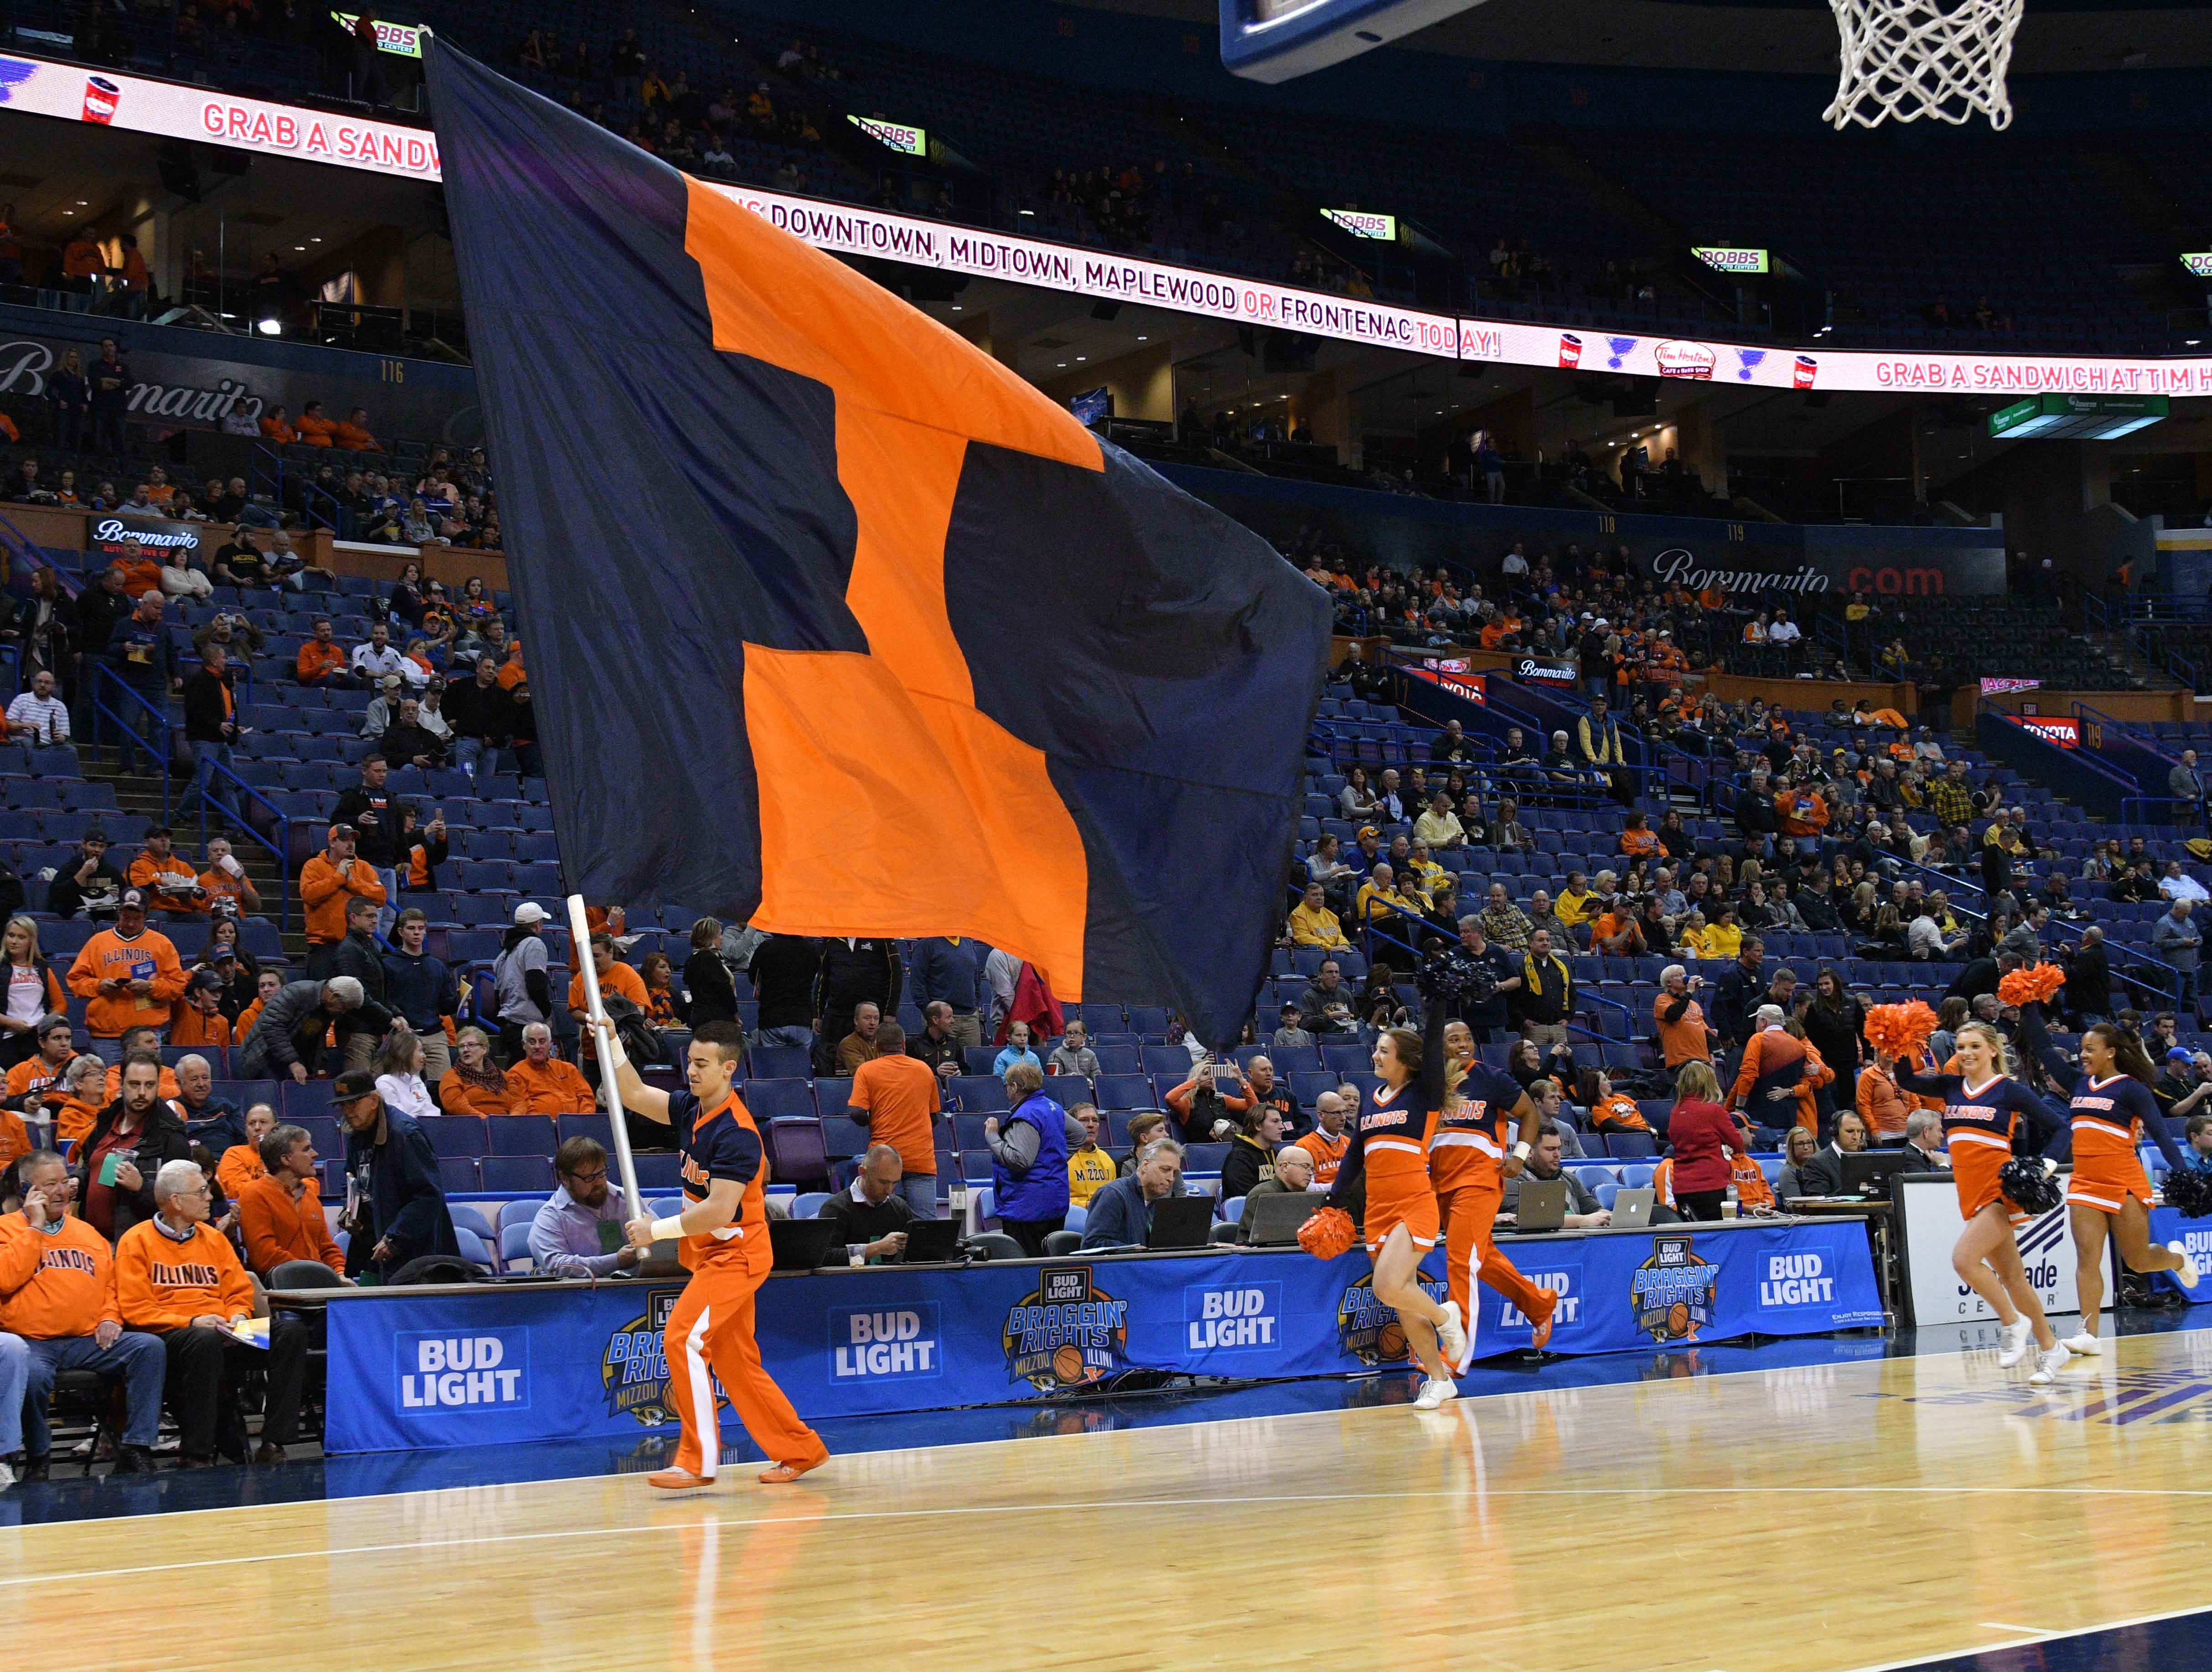 Illinois Basketball 4 key point guard recruits for the future